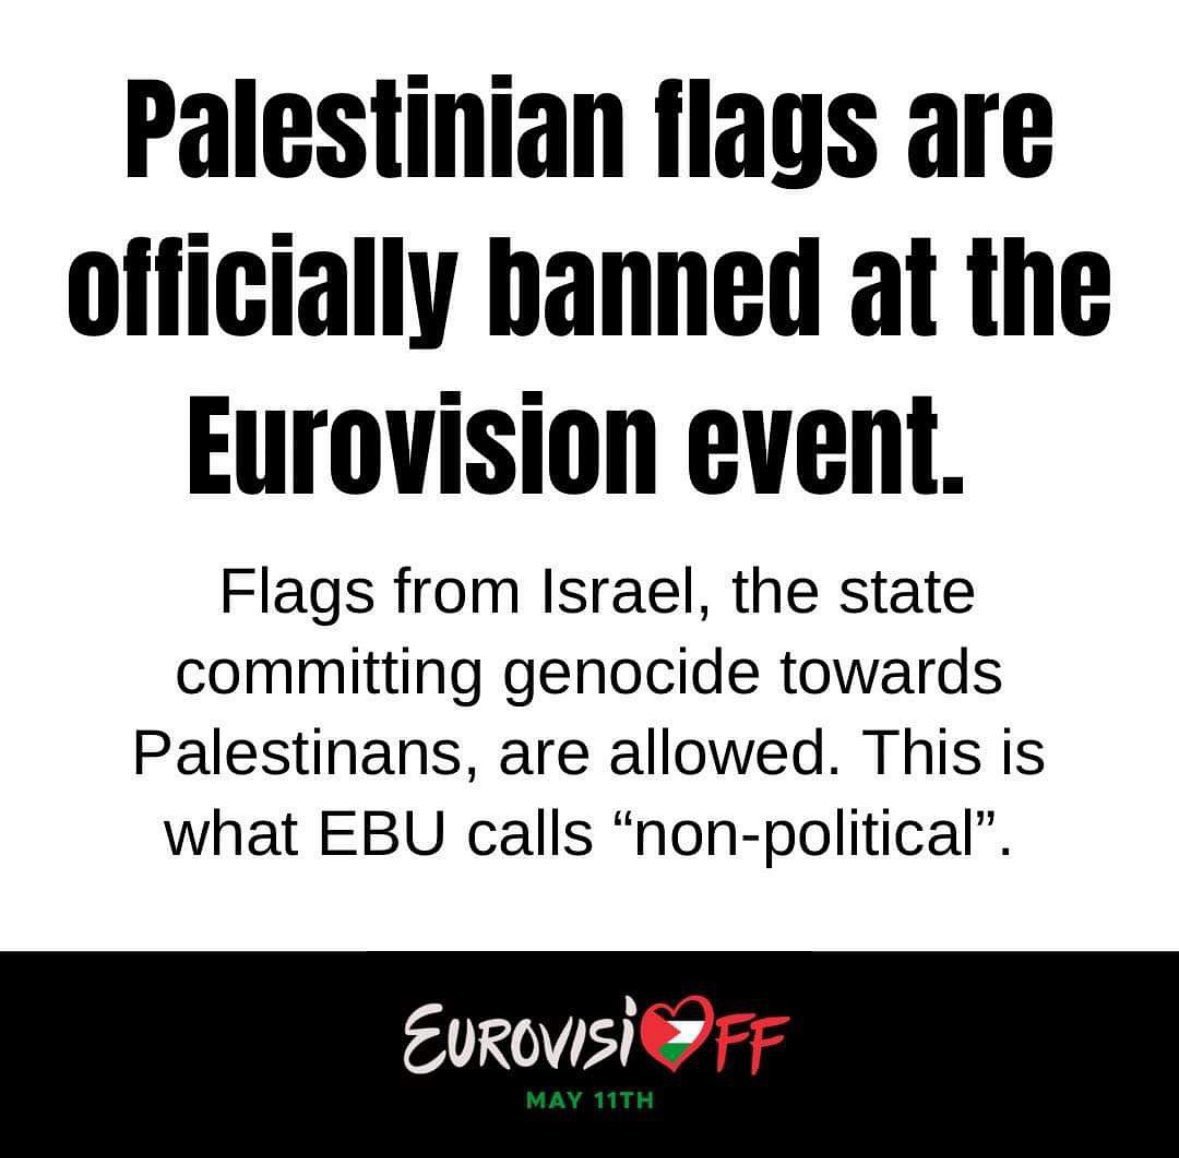 Instead of watching Eurovision, fly a Palestinian flag from your home tonight and Saturday🇵🇸